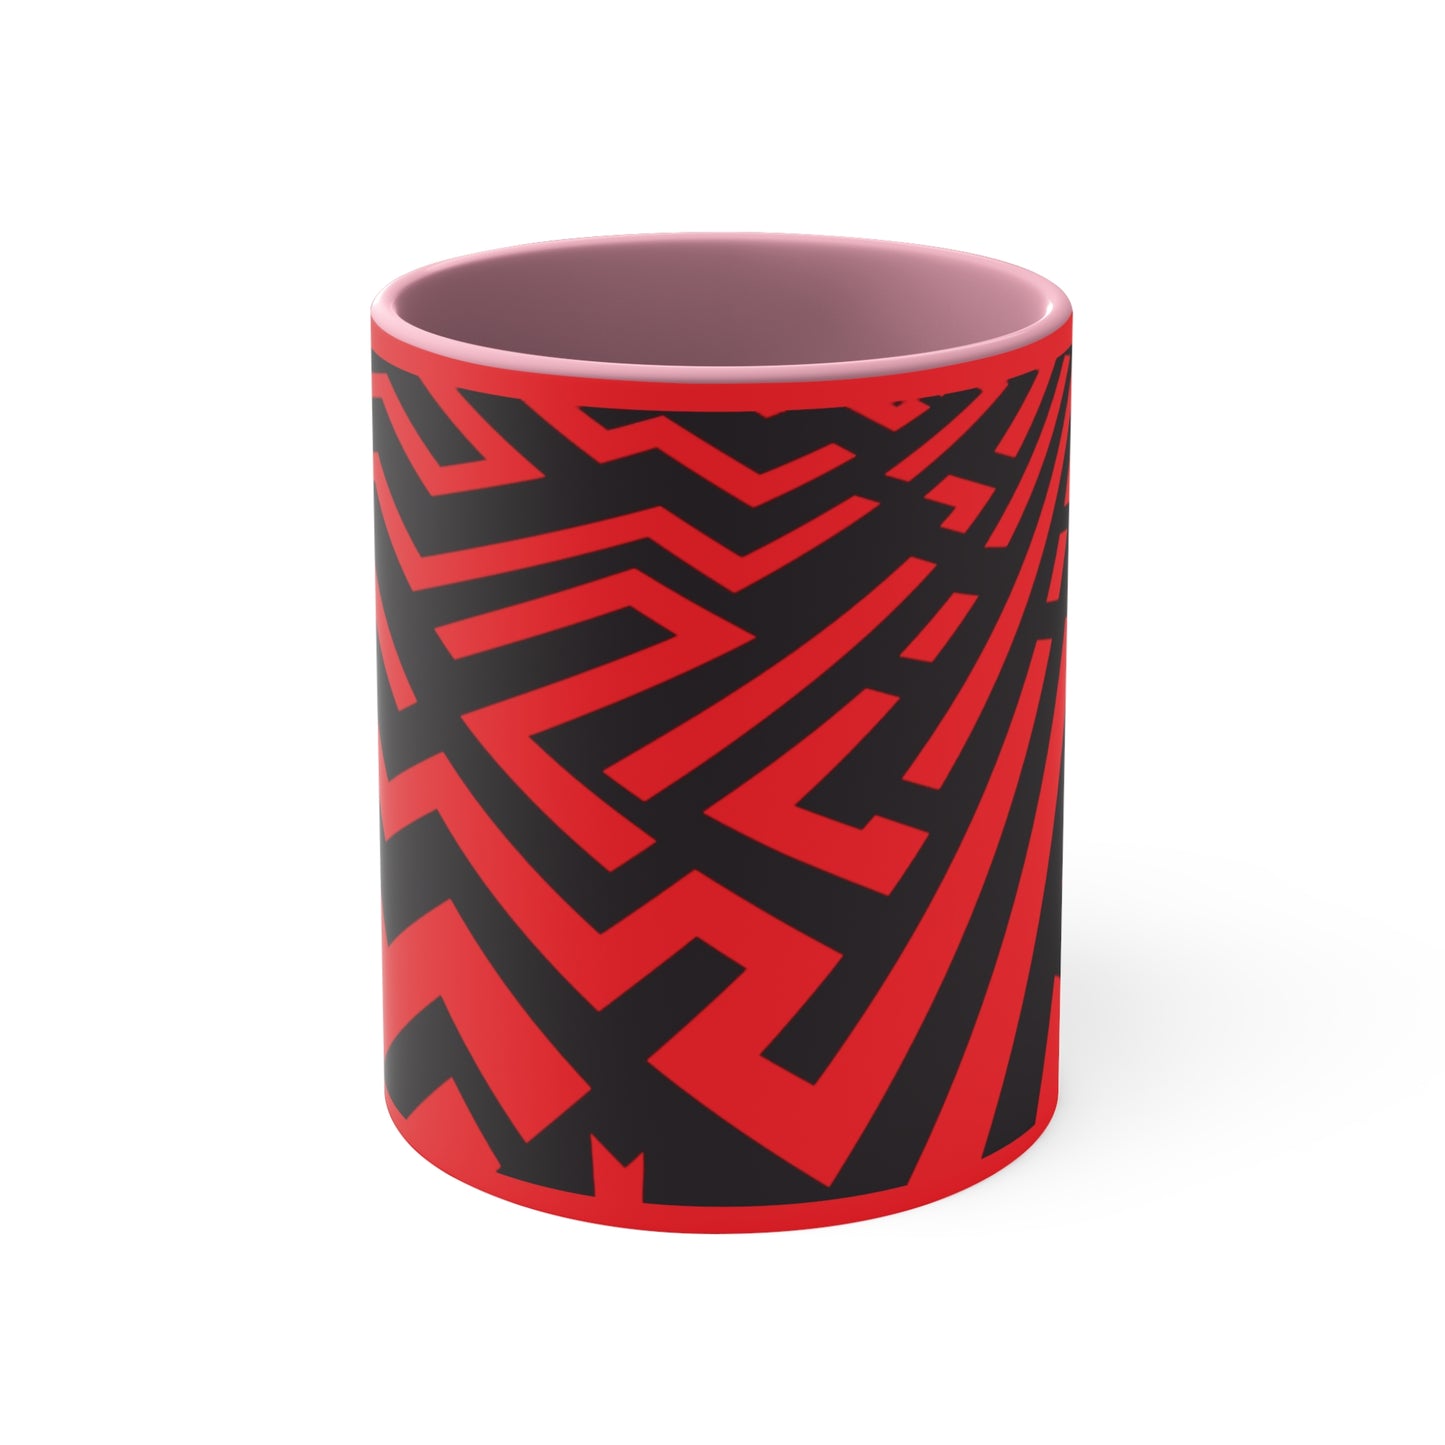 Maze 1 in Red